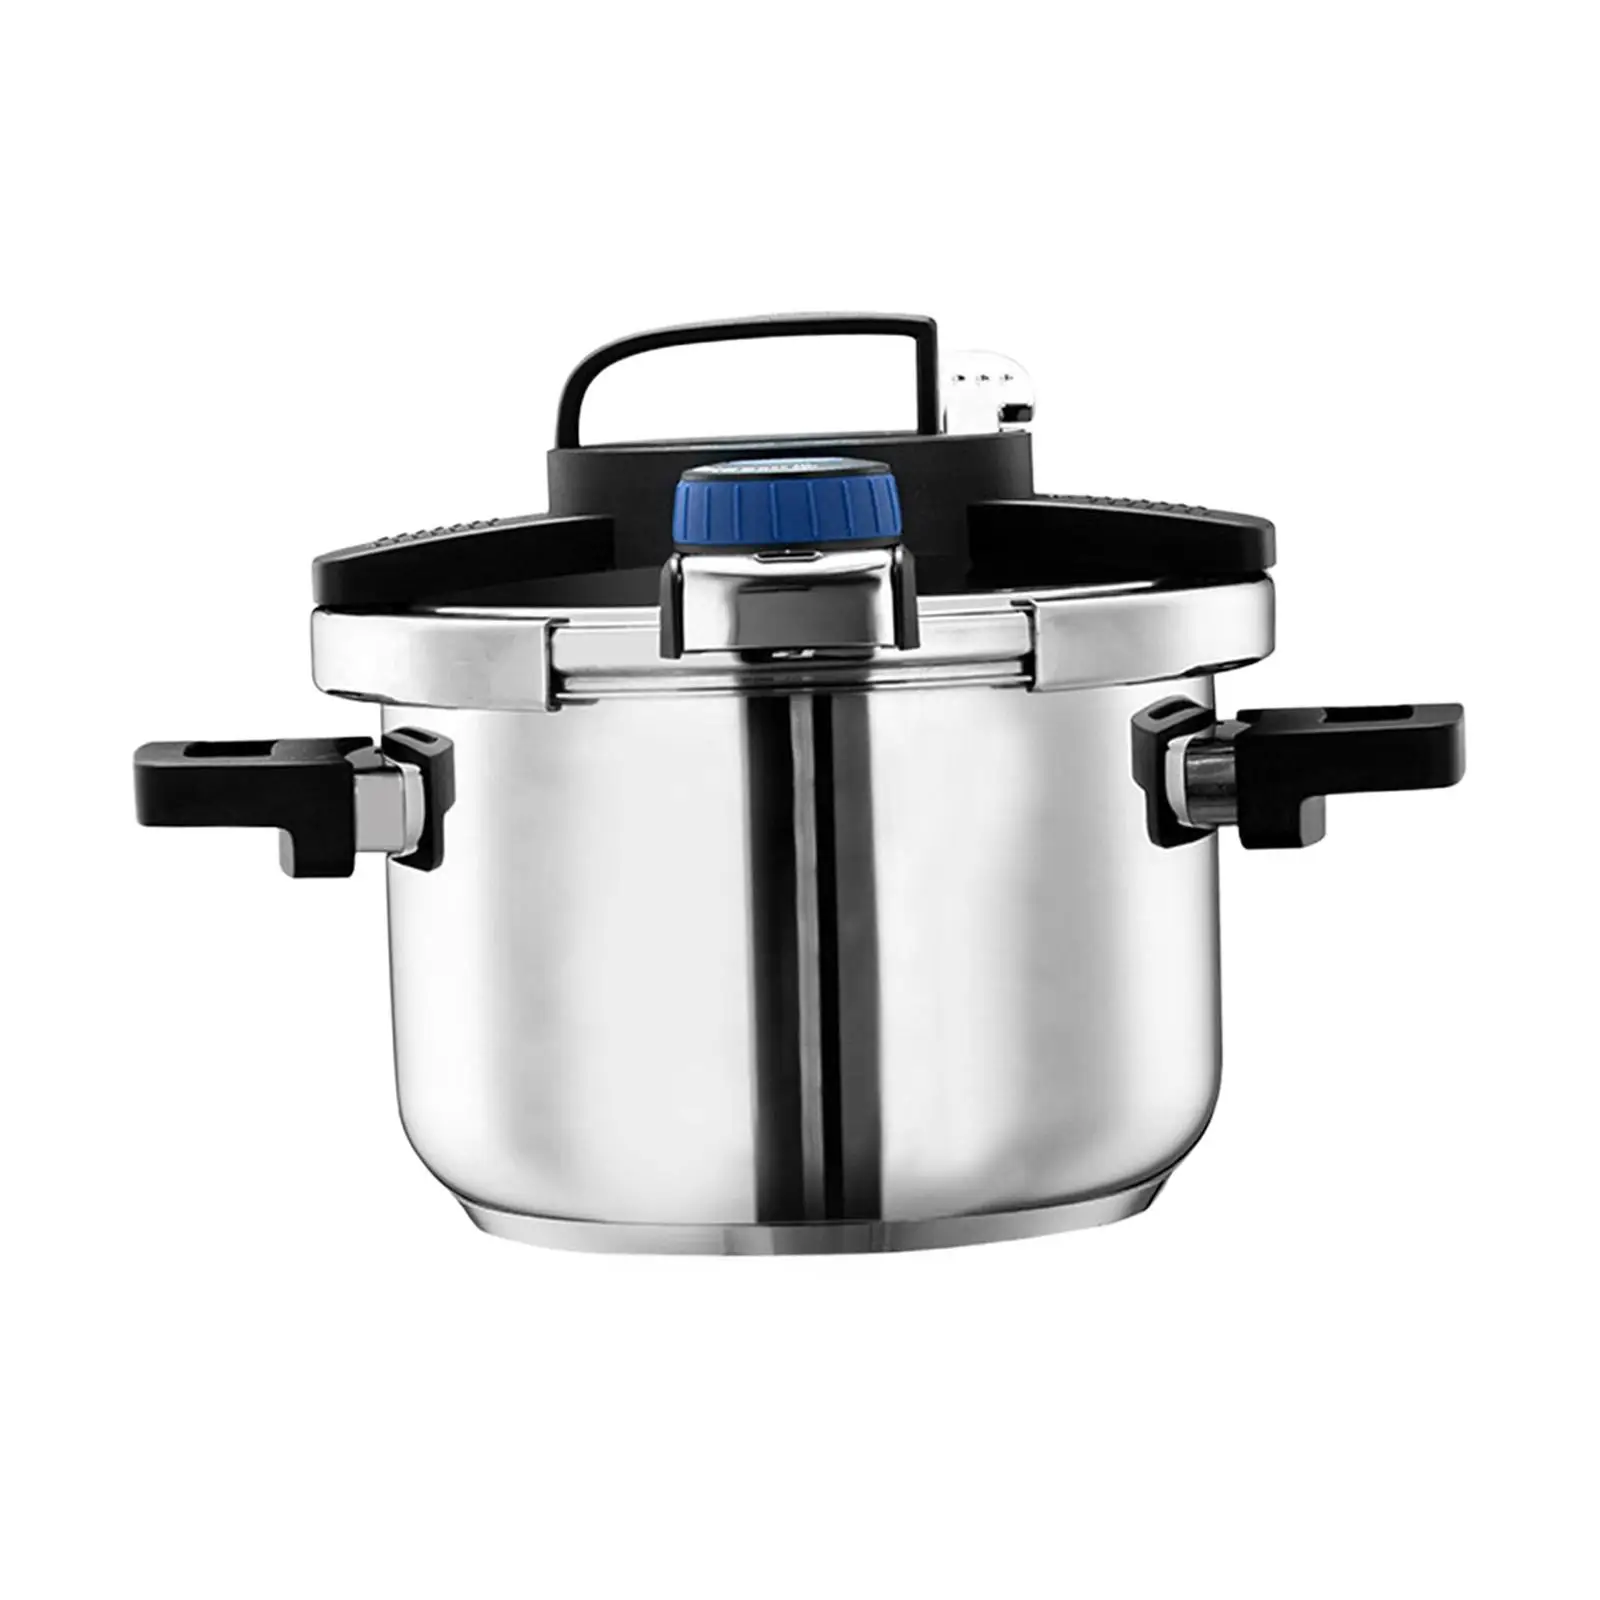 Stainless Steel Pressure Cooker Gas Induction Cooker for Camping Home Family